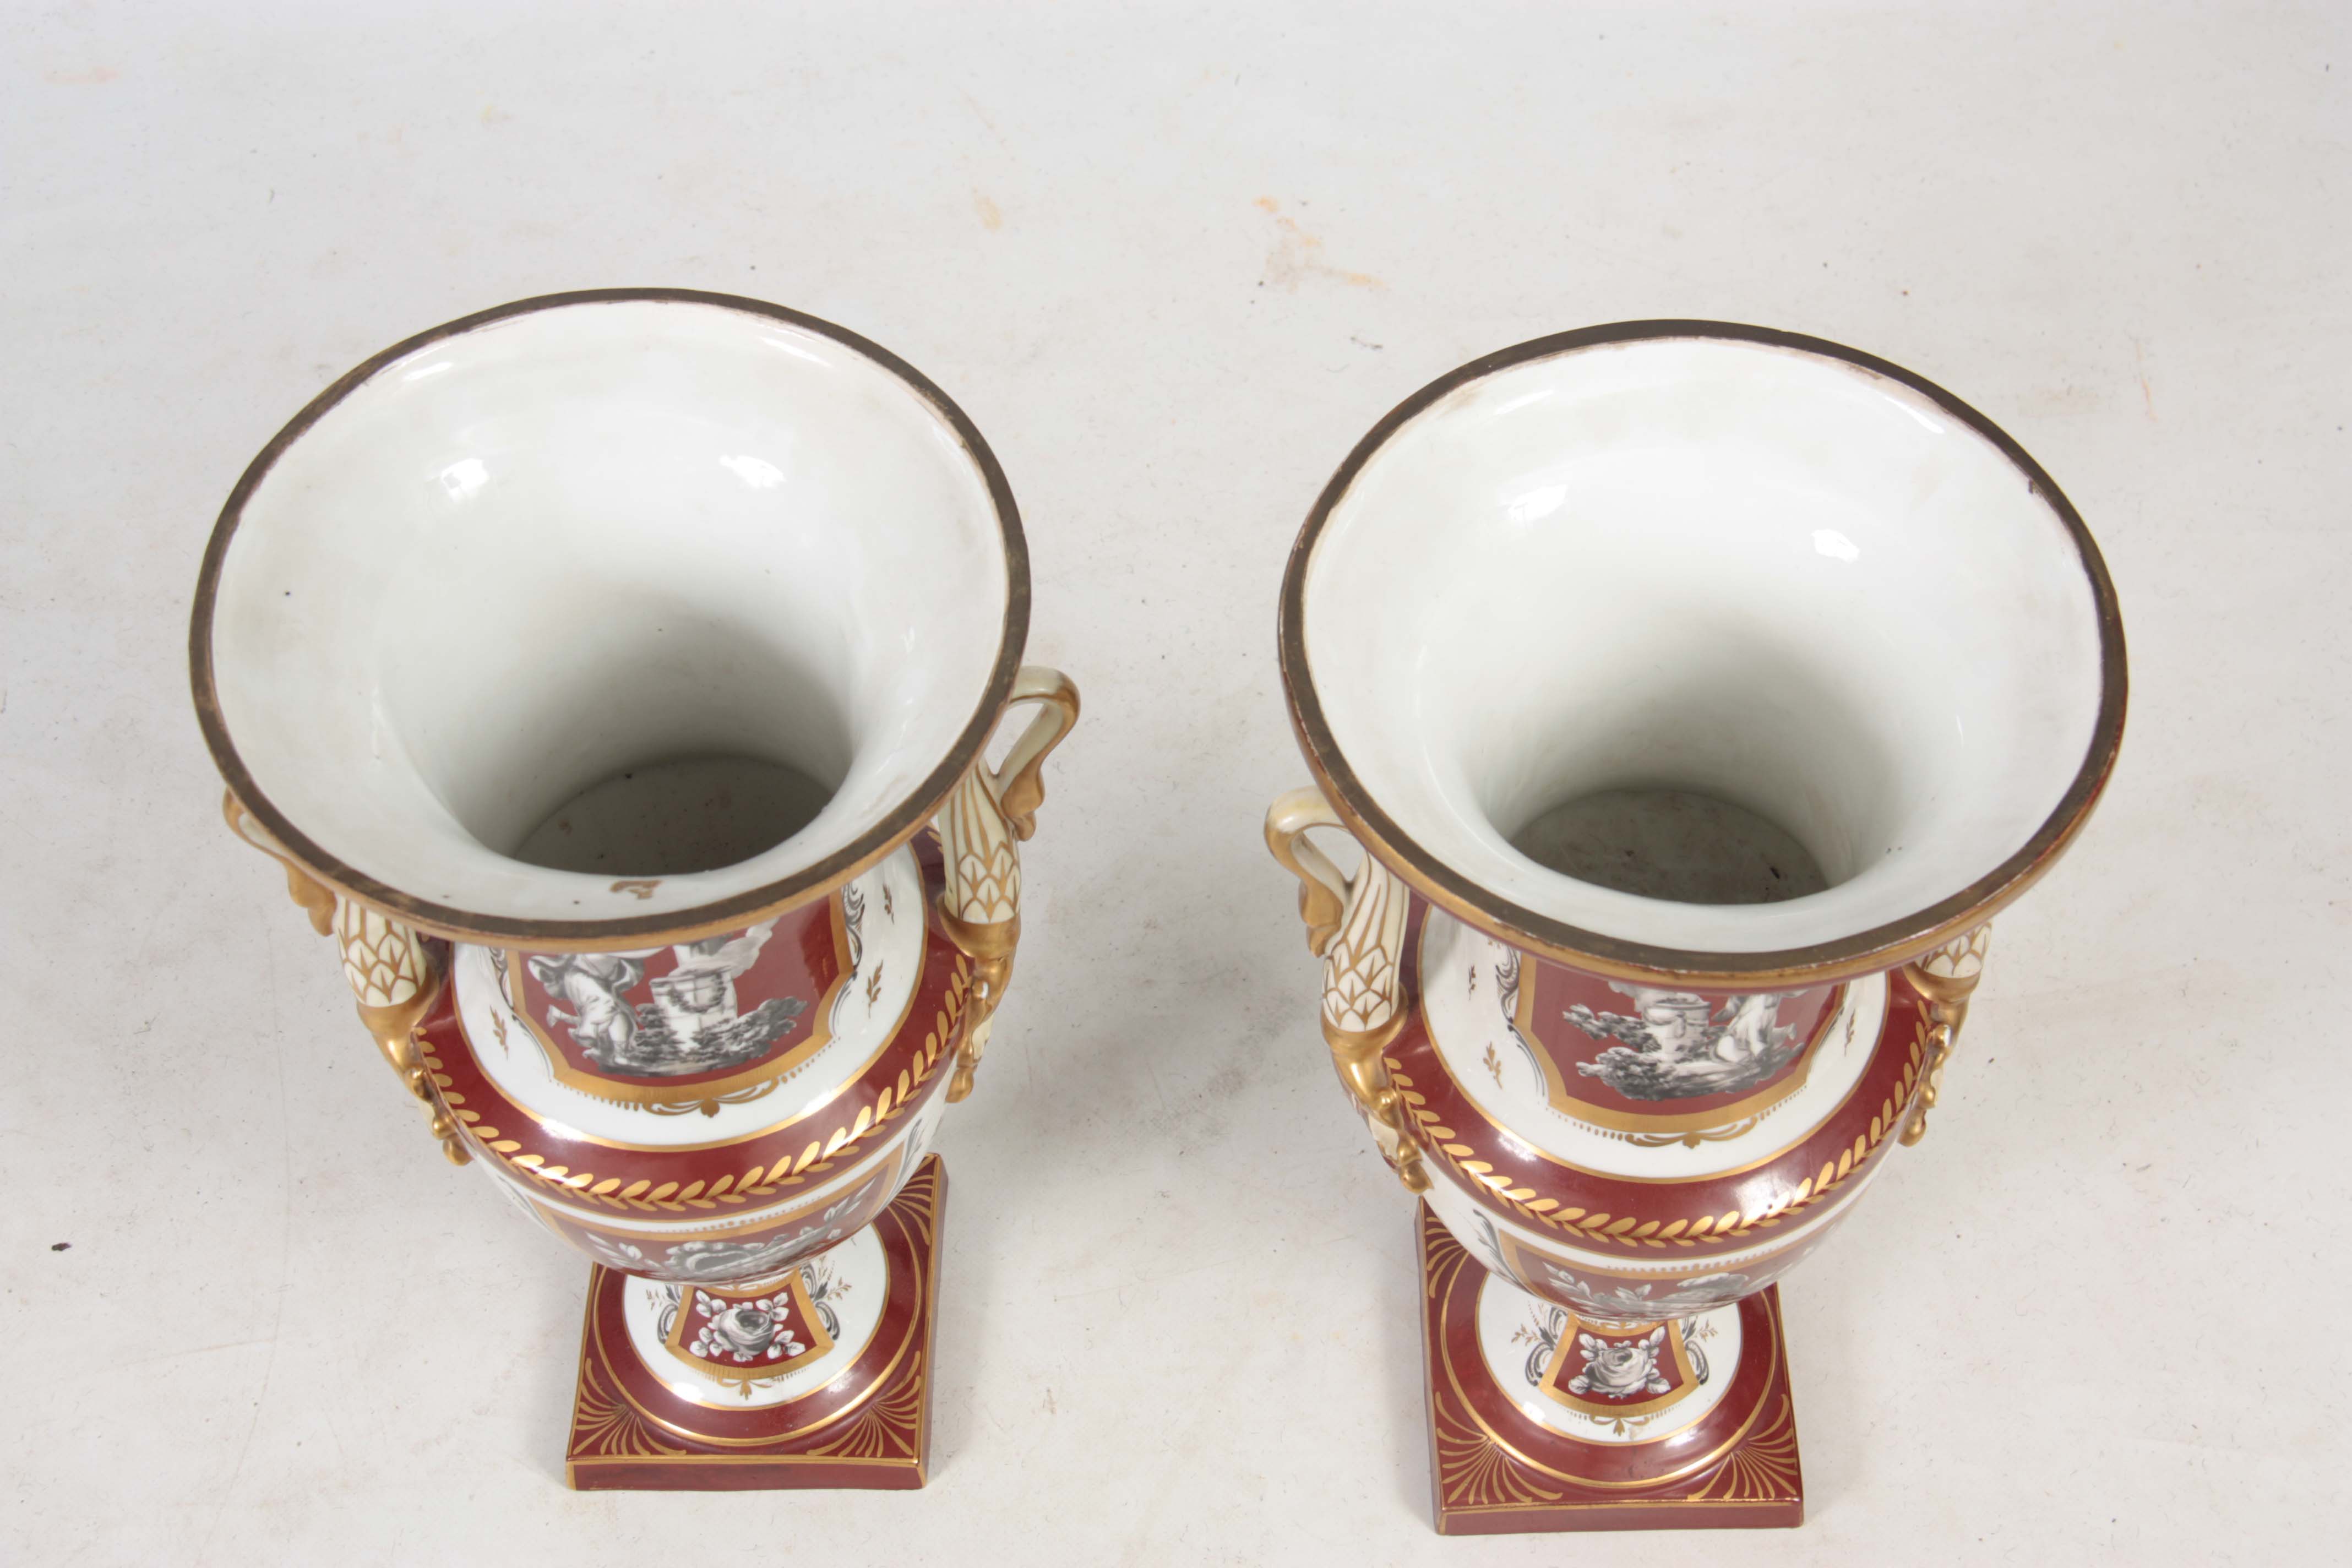 A PAIR OF 19TH CENTURY PARIS HARD PORCELAIN CAMPAGNE SHAPED VASES with gilded rust panels and - Image 6 of 6